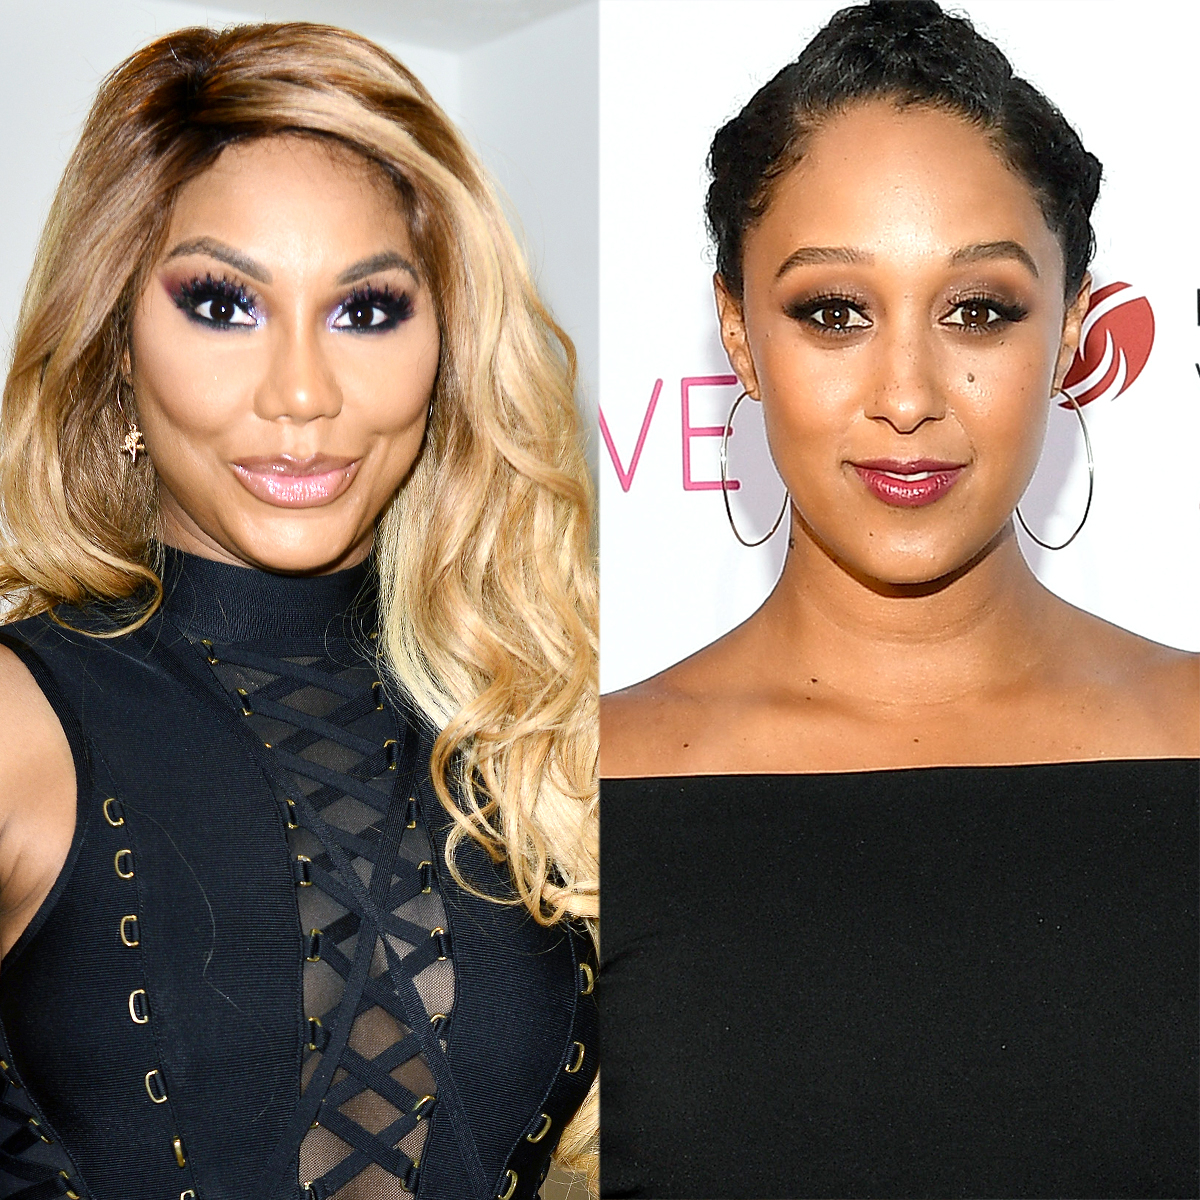 Tamar Braxton & Tamera Mowry Share Sweet Words After The Real - E ...